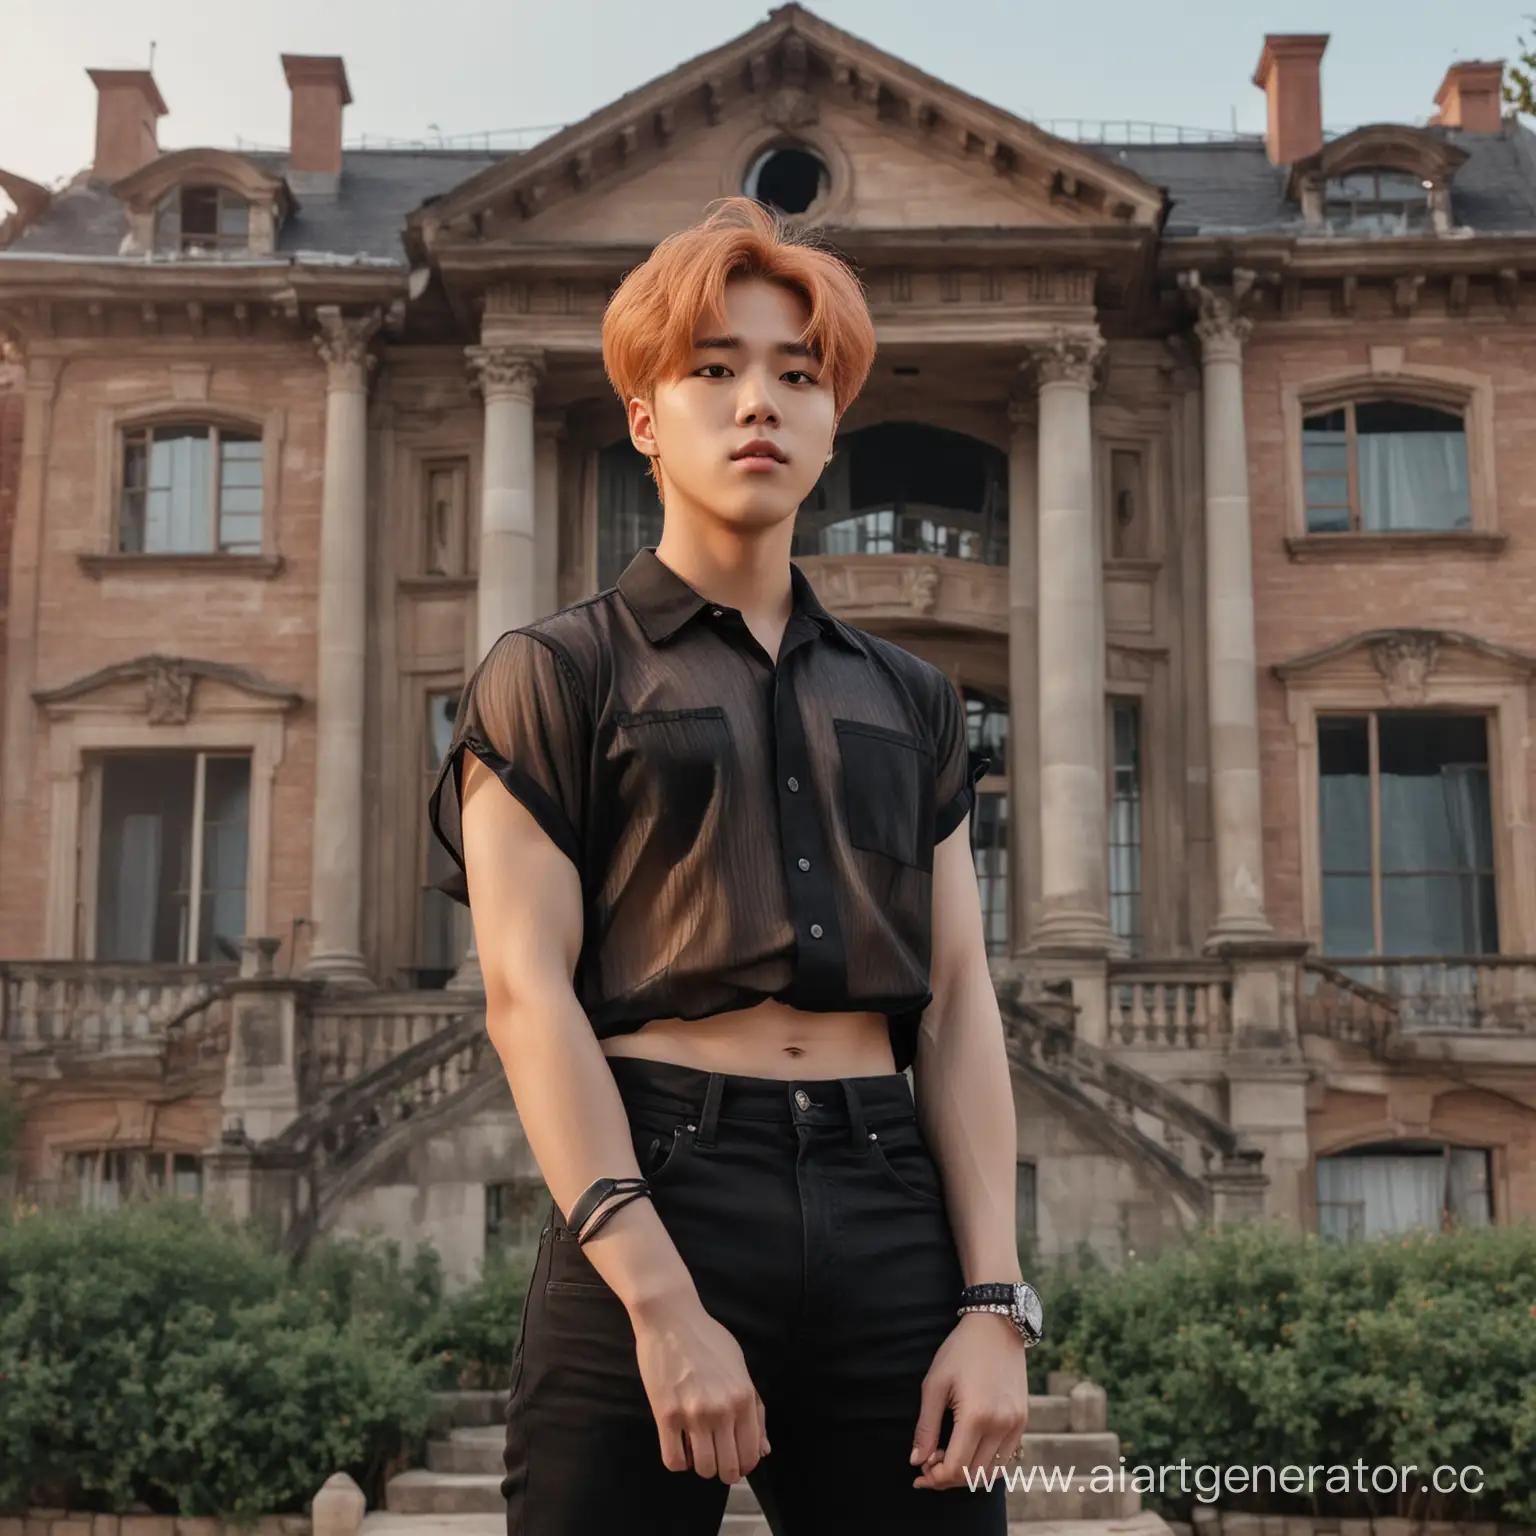 BTS-Jimin-with-Peach-Hair-in-Front-of-Vintage-Mansion-at-Dusk